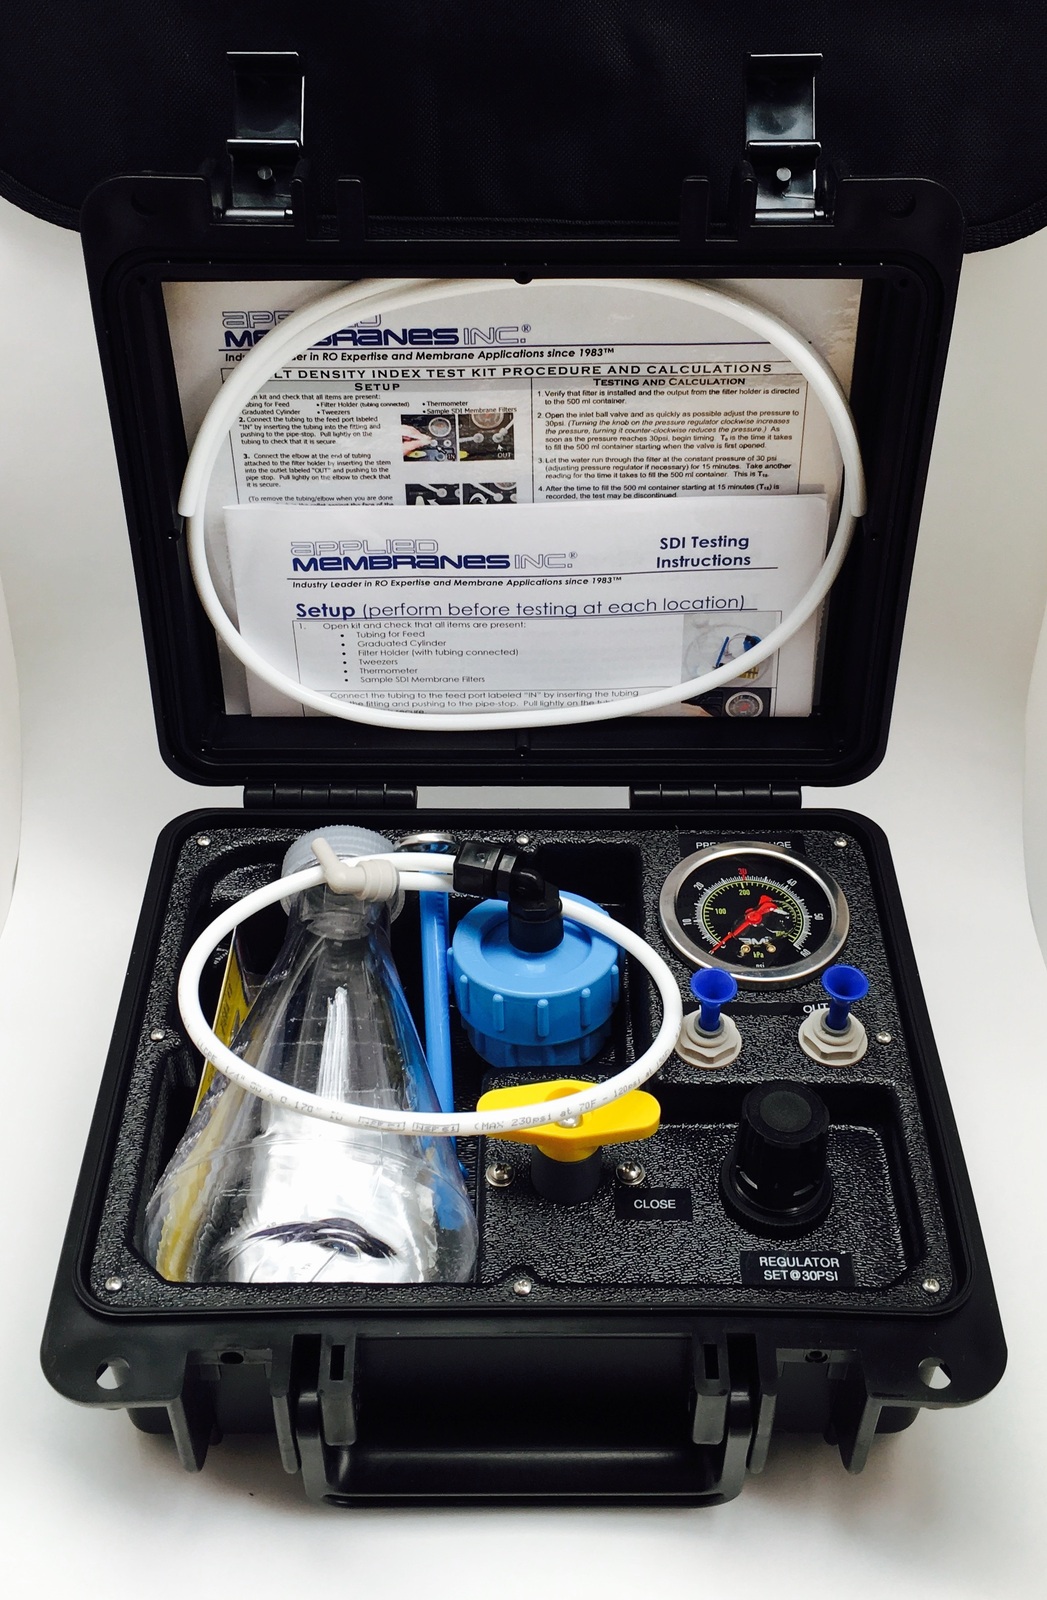 Includes 2 SDI Test Filters SDI Tester in Portable Carrying Case for Onsite Water Testing Applied Membranes Silt Density Index Test Kit 